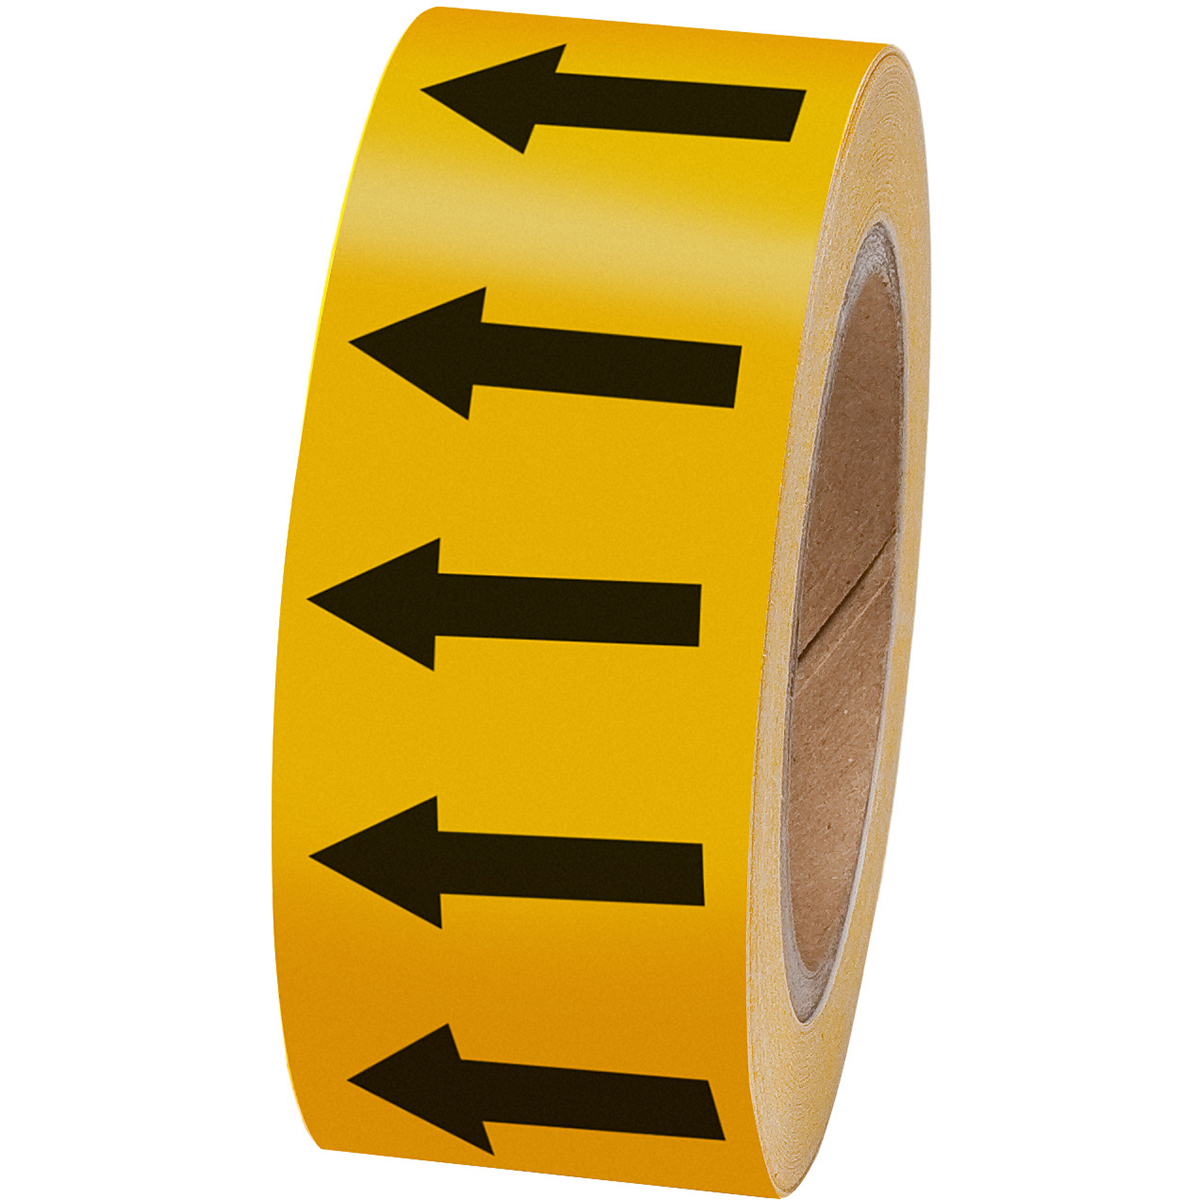 Black on yellow 50mm Directional Flow arrow Tape